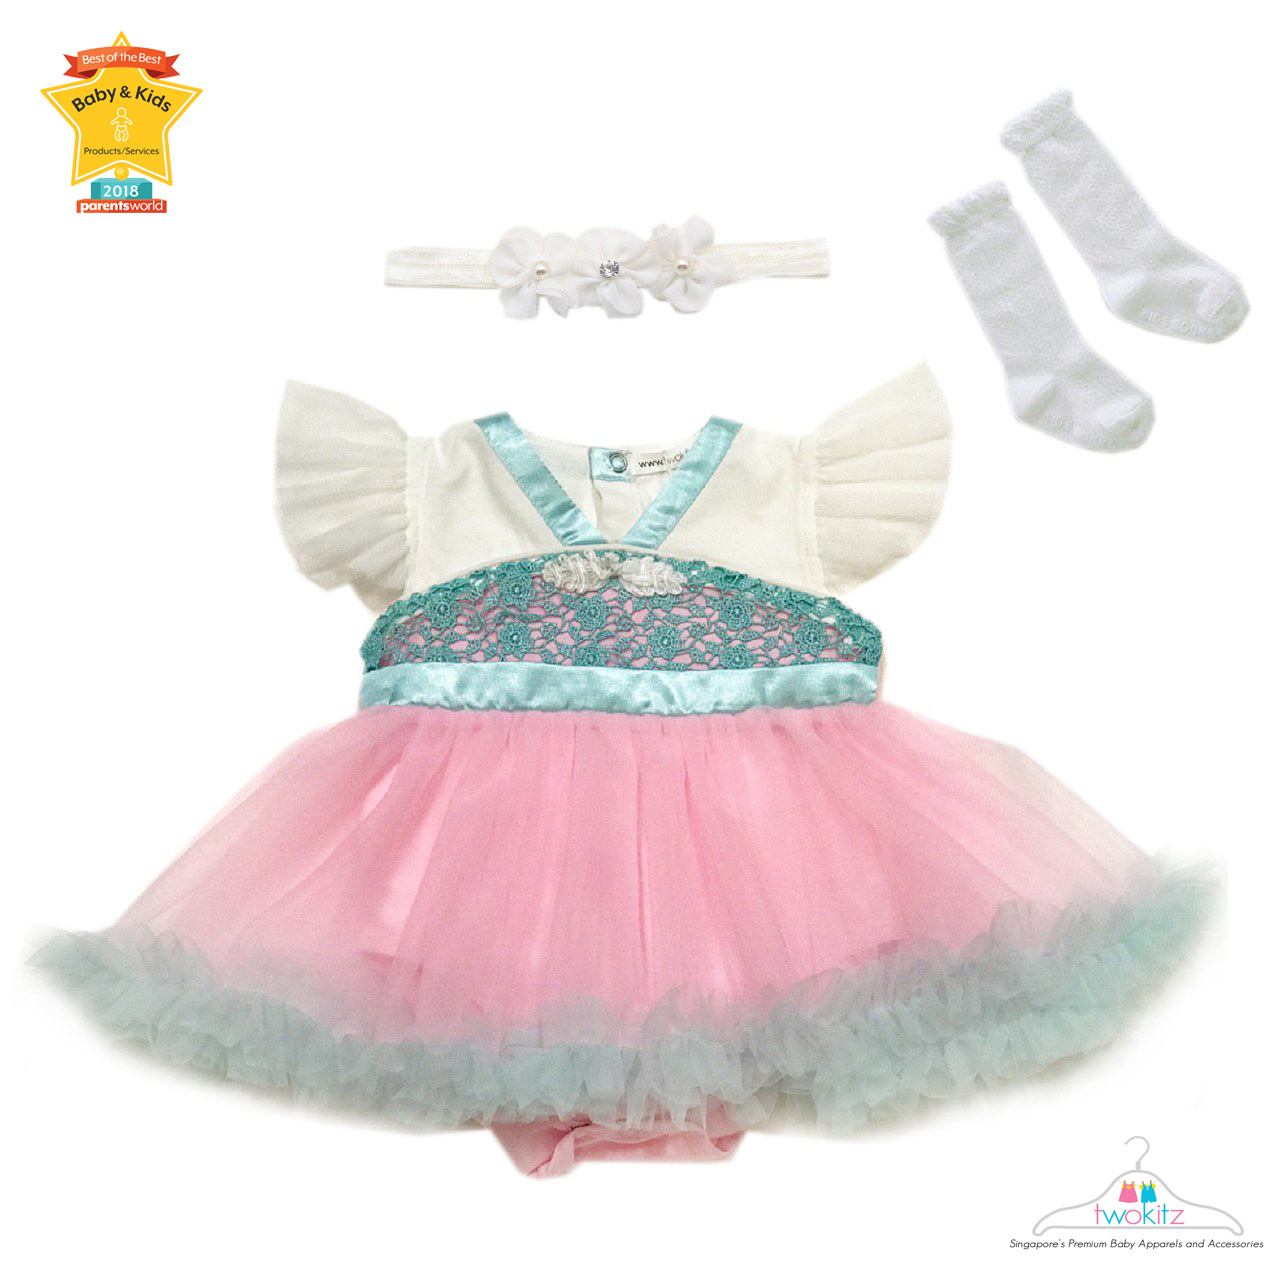 Twokitz Chinese Hanbok Style Fluffy Romper Dress + Free Headband and a pair of socks